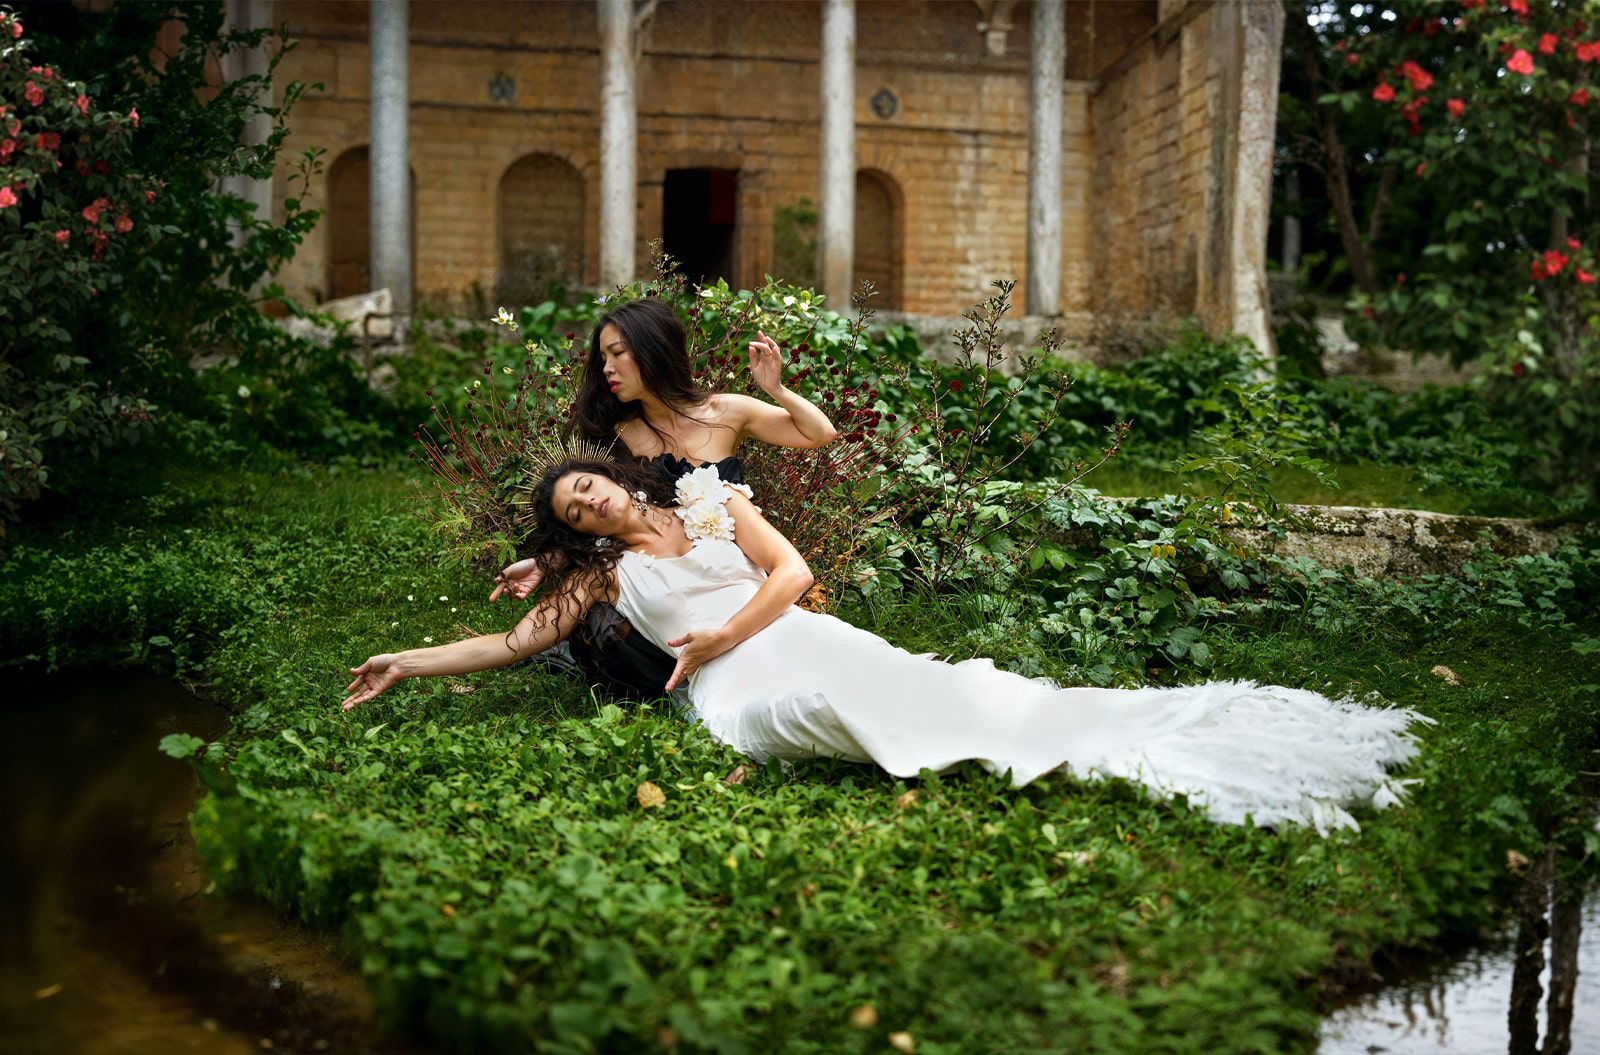 Two models are posing surrounded by nature